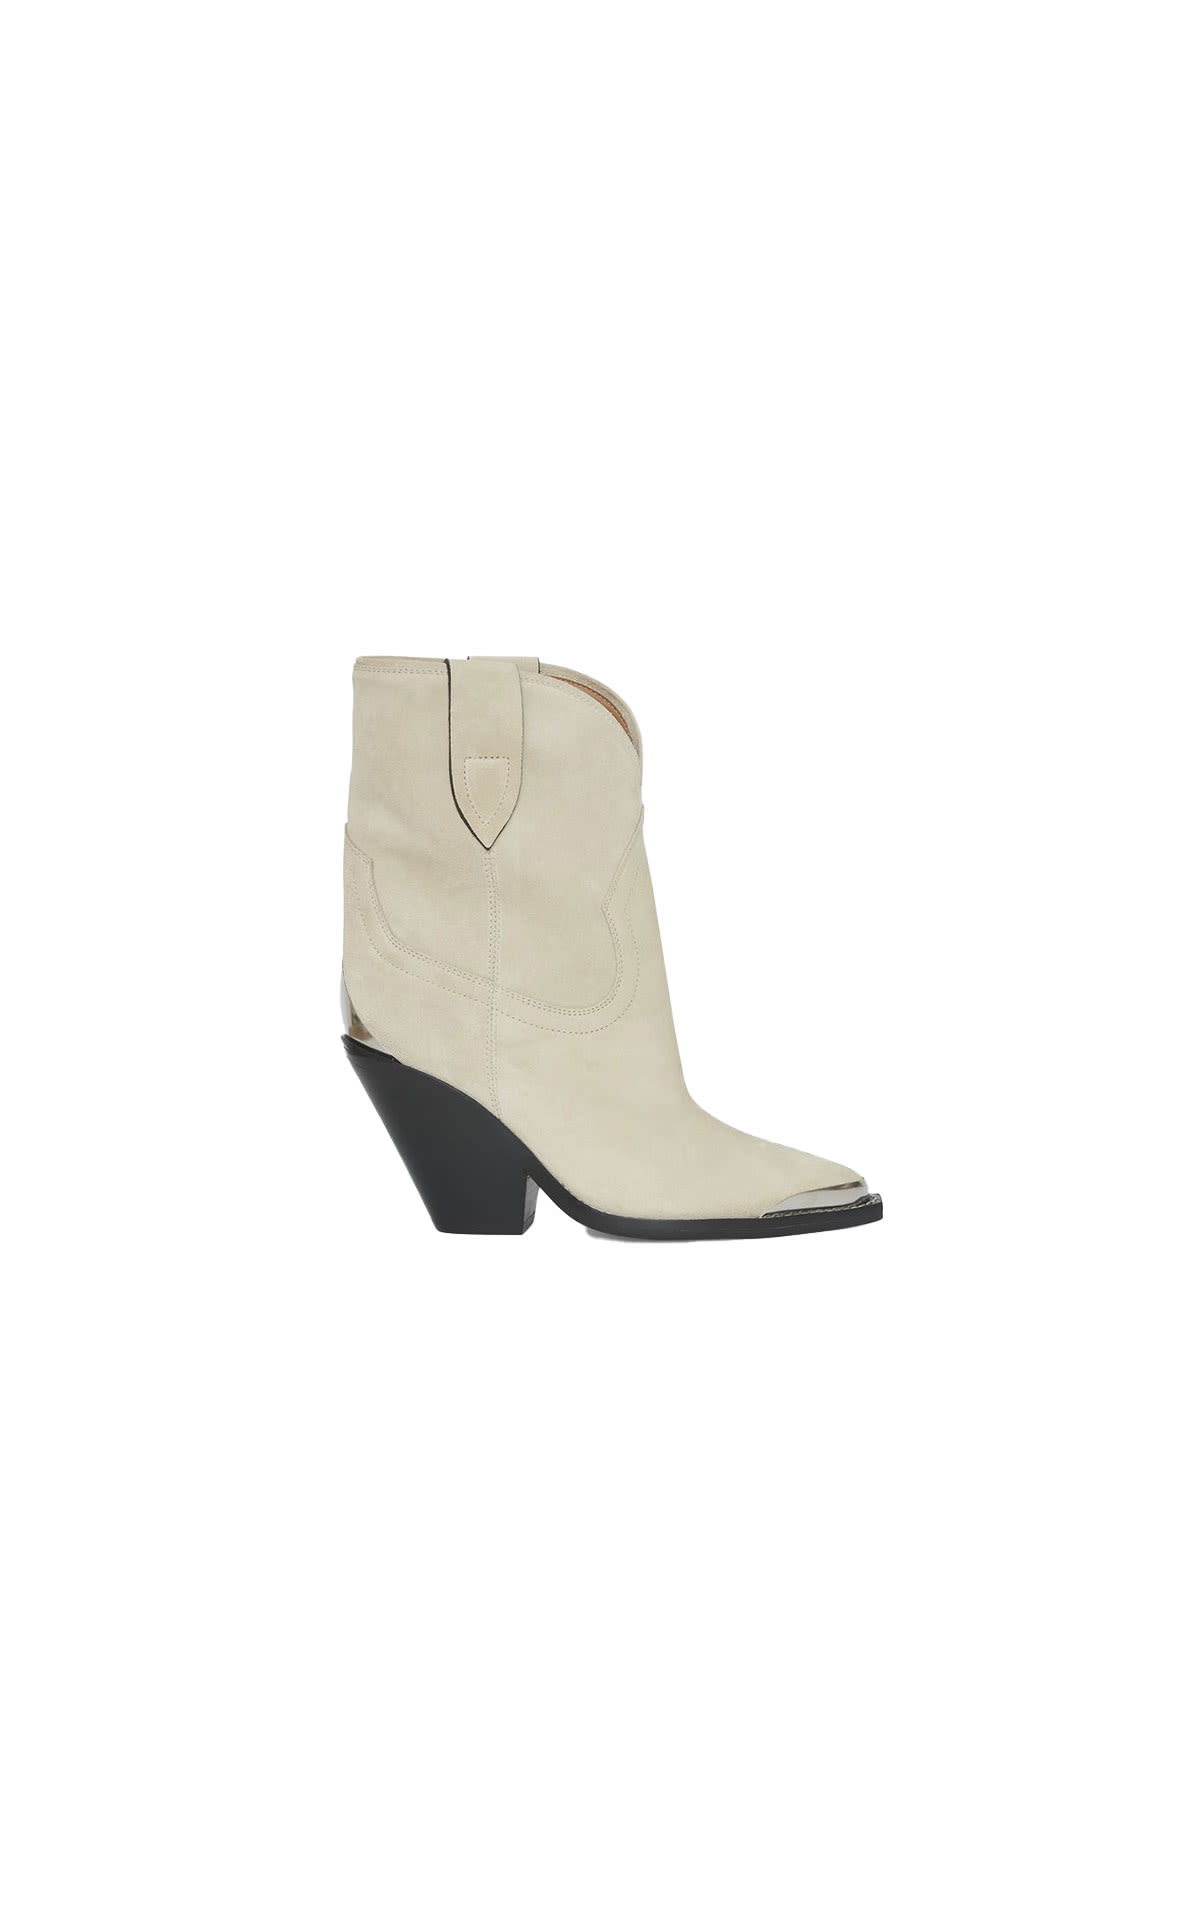 Isabel Marant Leyanne boots from Bicester Village